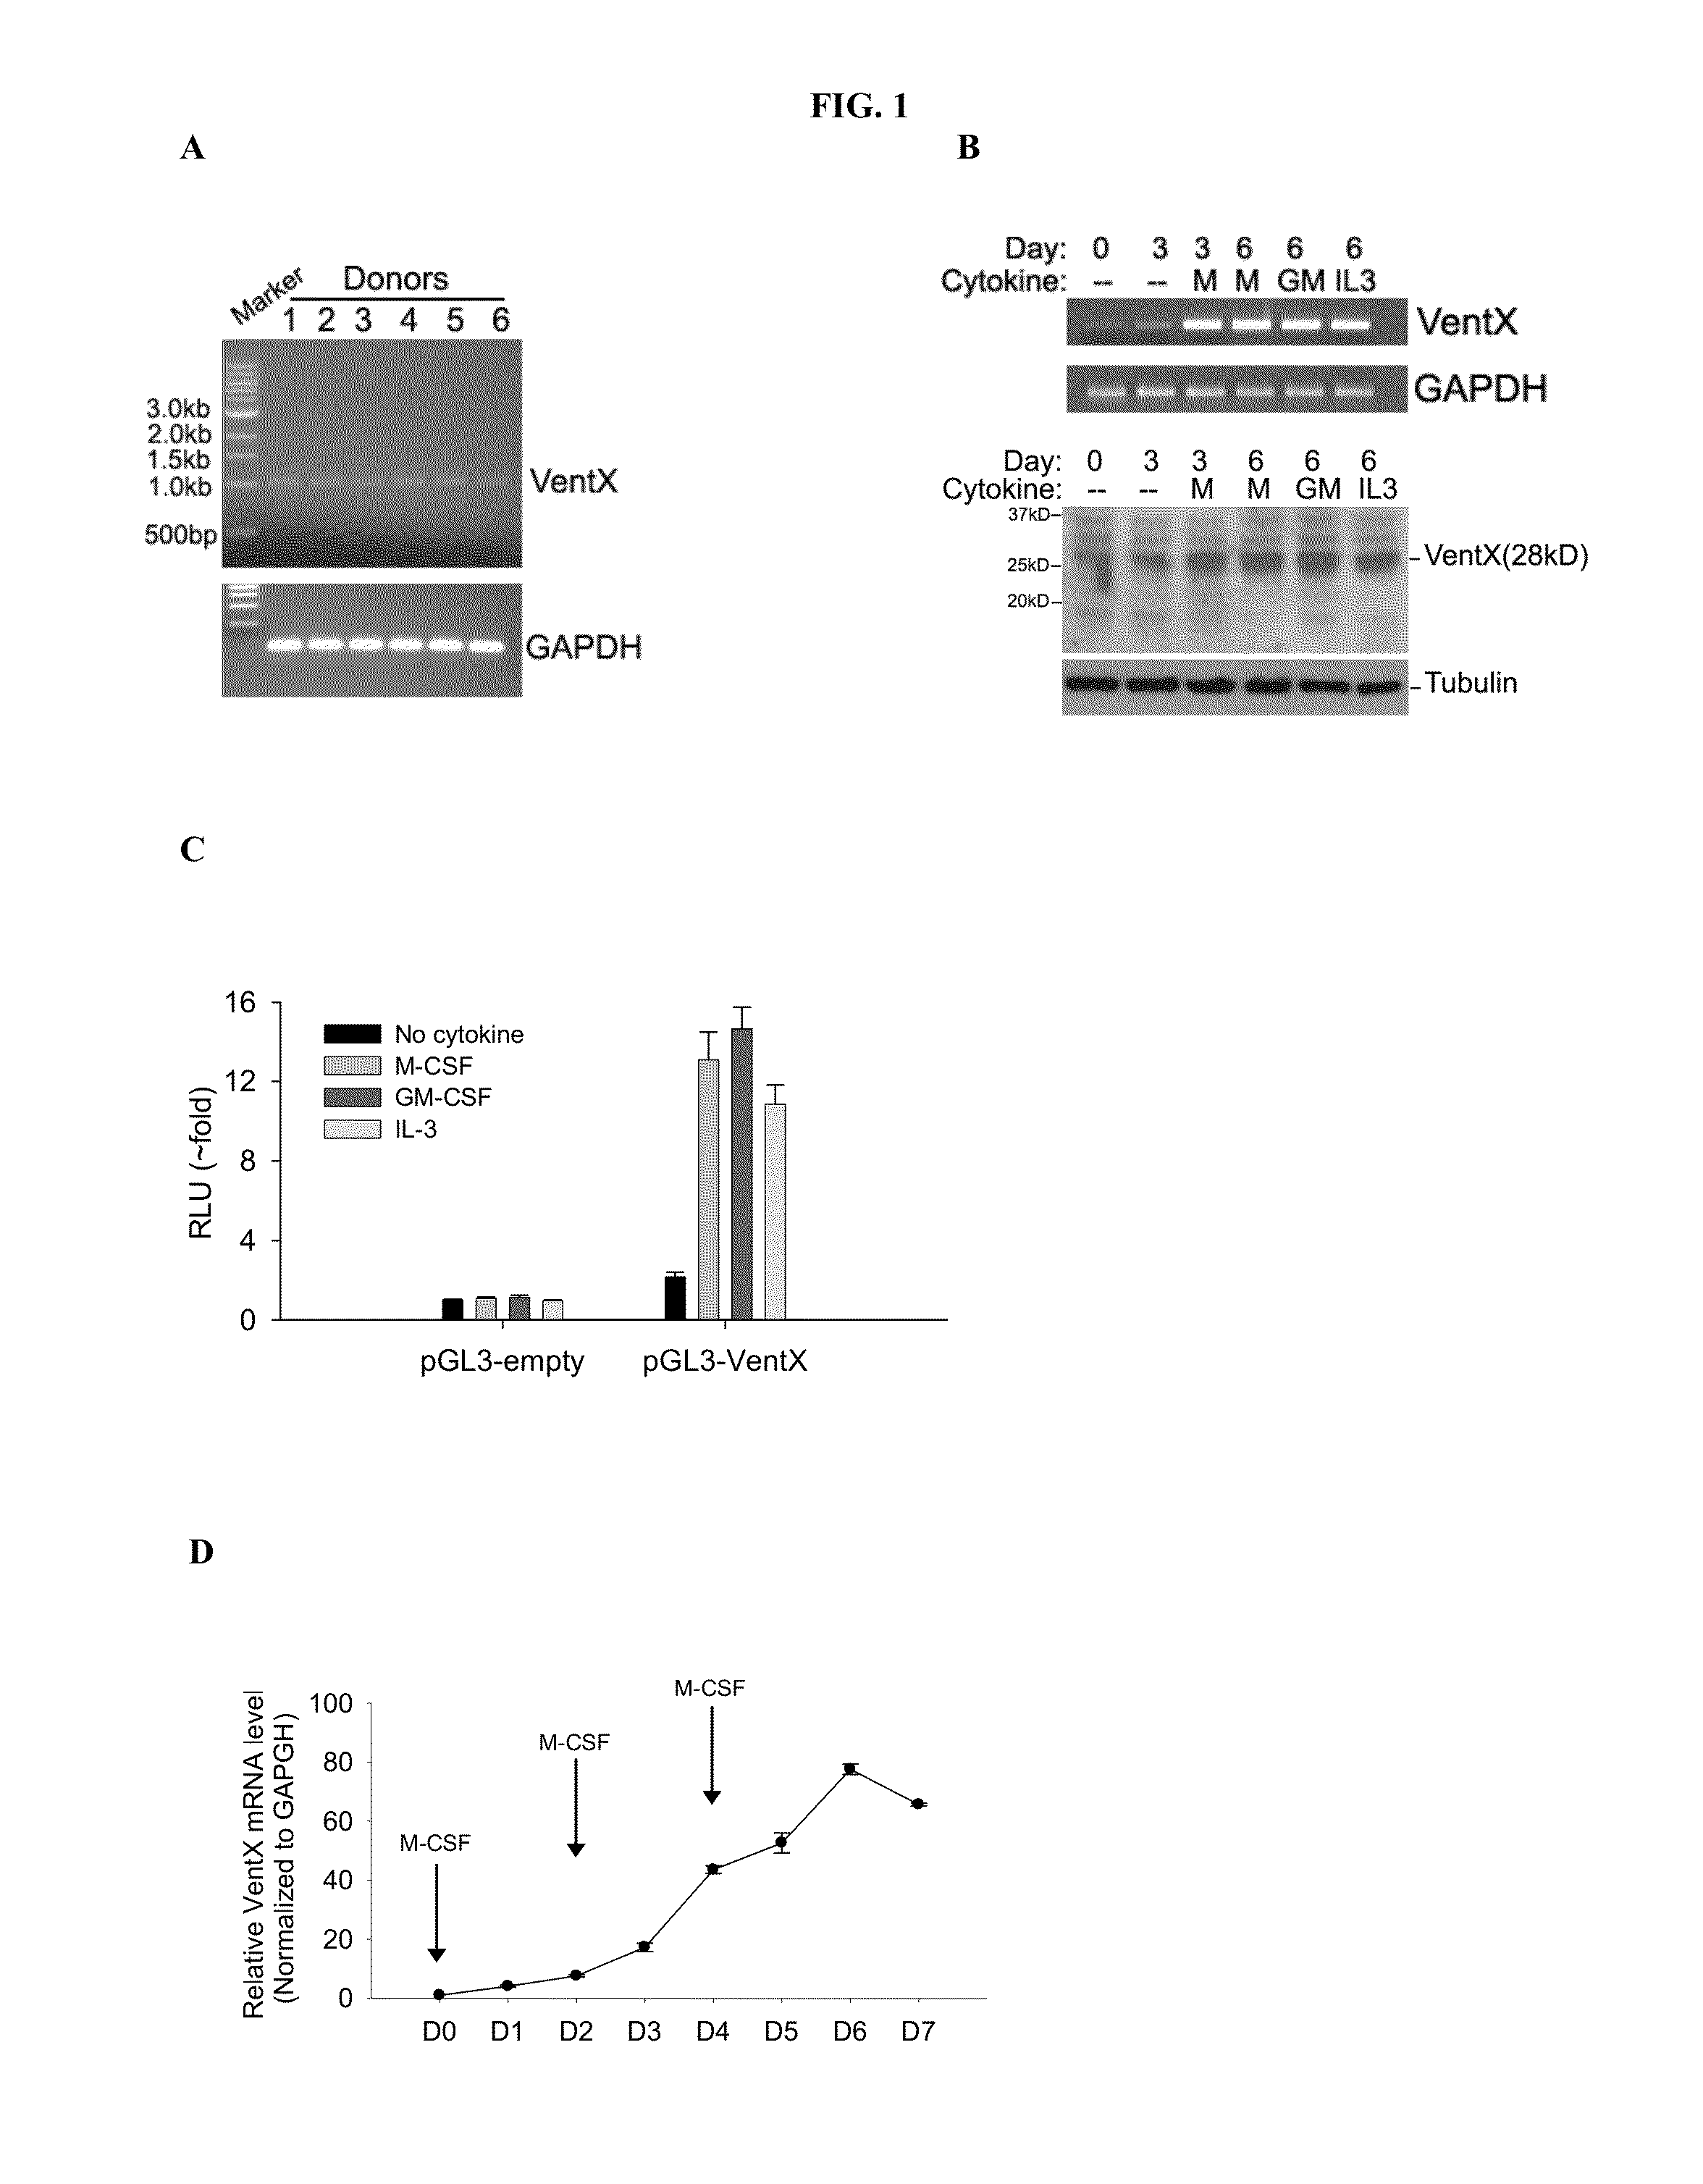 Human homeobox gene ventx and macrophage terminal differentiation and activation, compositions and methods thereof